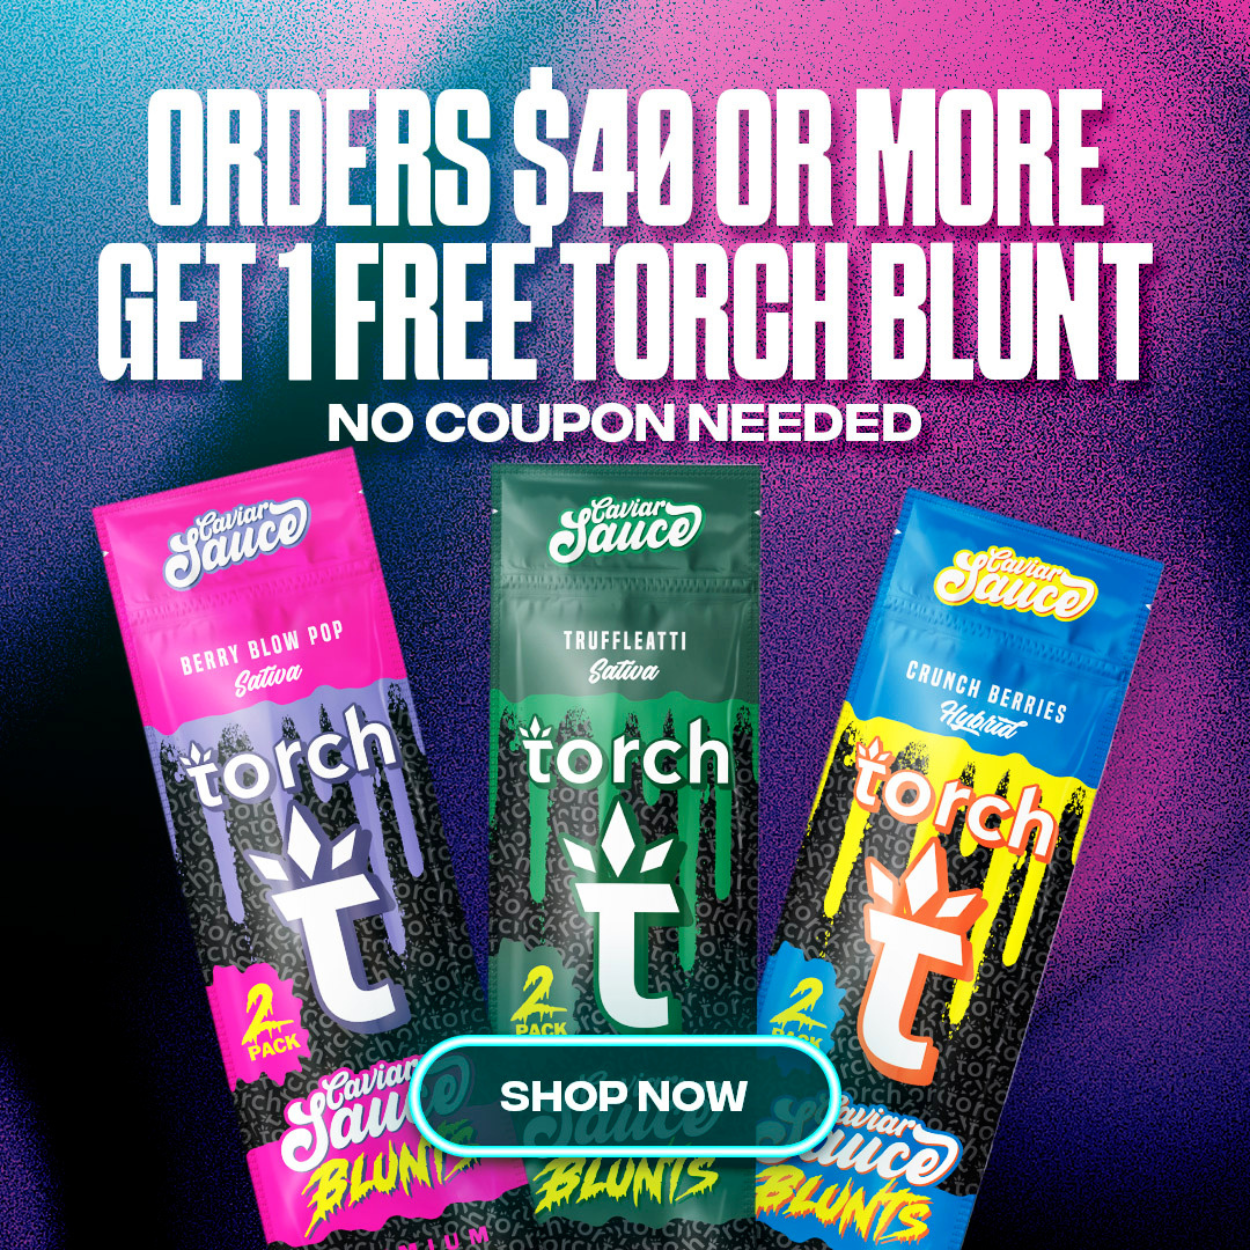 Orders Over $40 or More Get 1 FREE Torch Caviar Blunt - No Coupon Needed